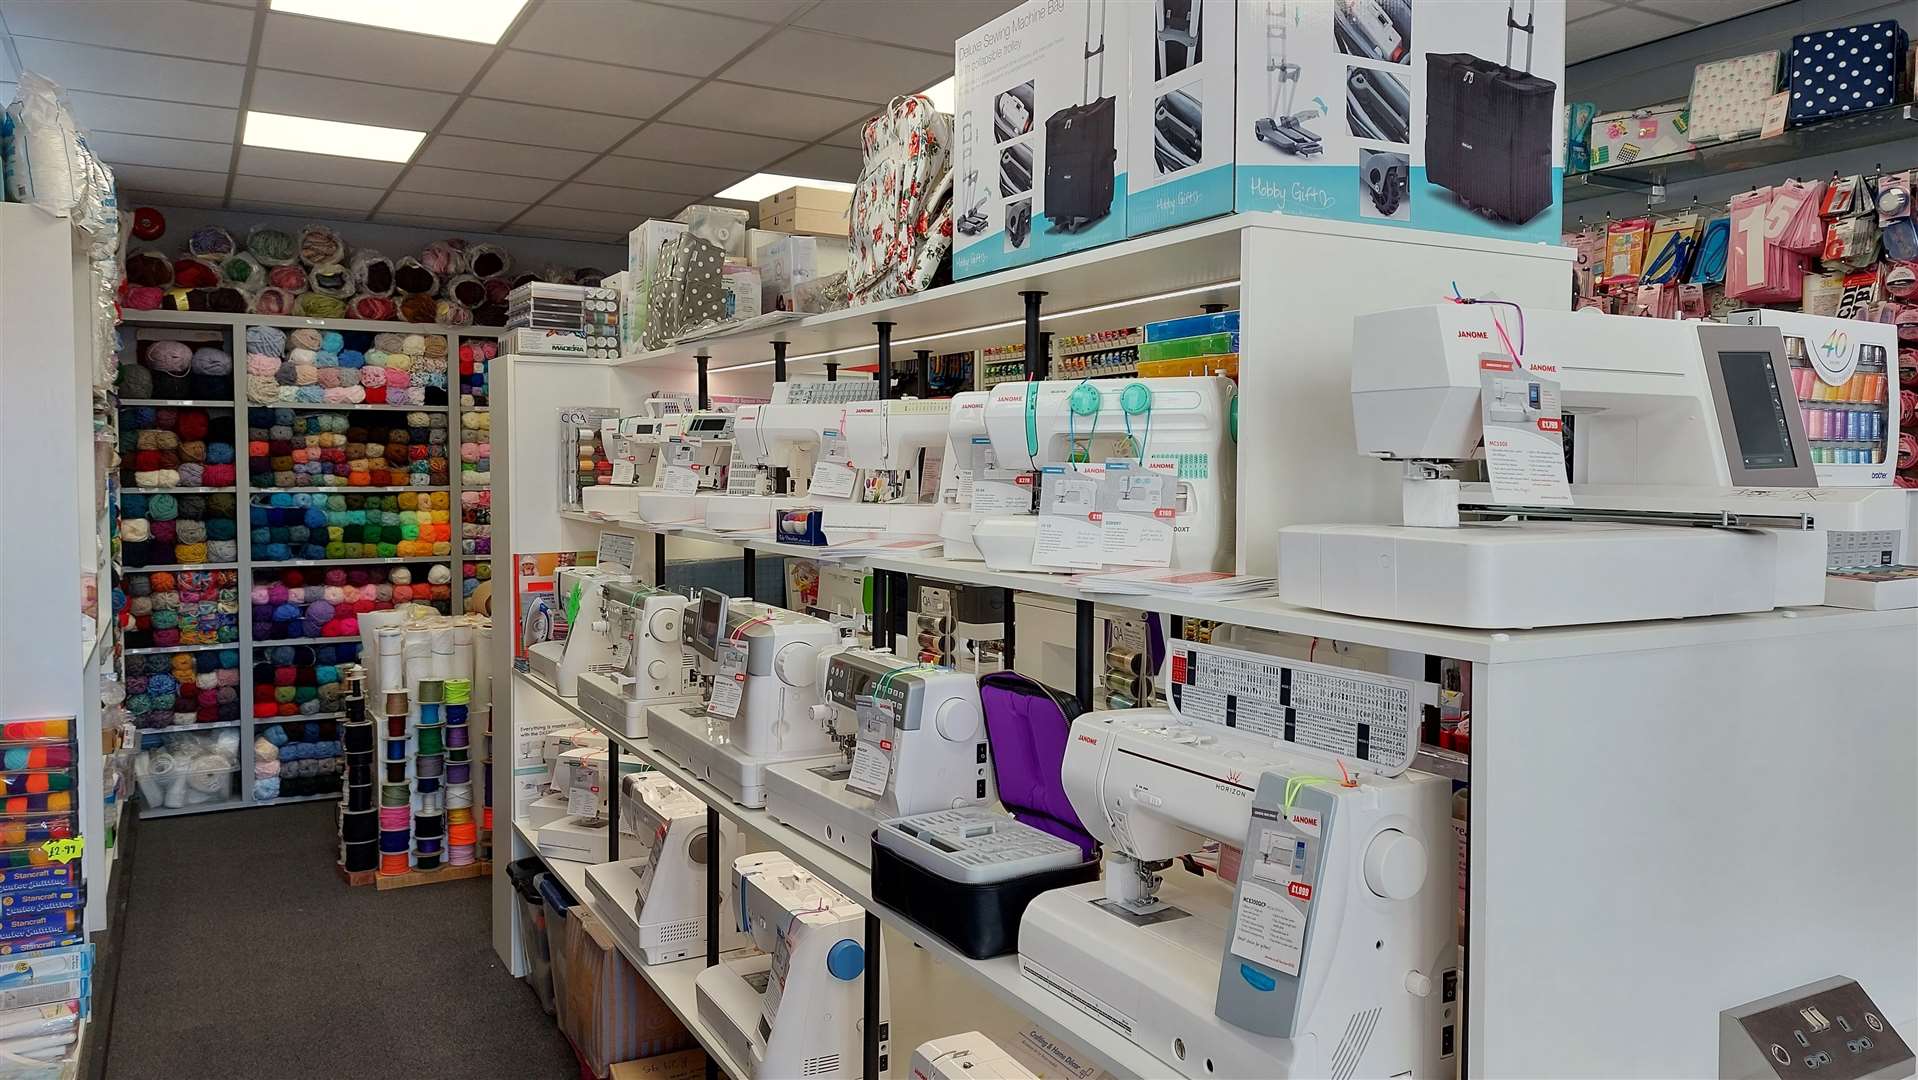 The store sells sewing machines, haberdashery and knitting supplies